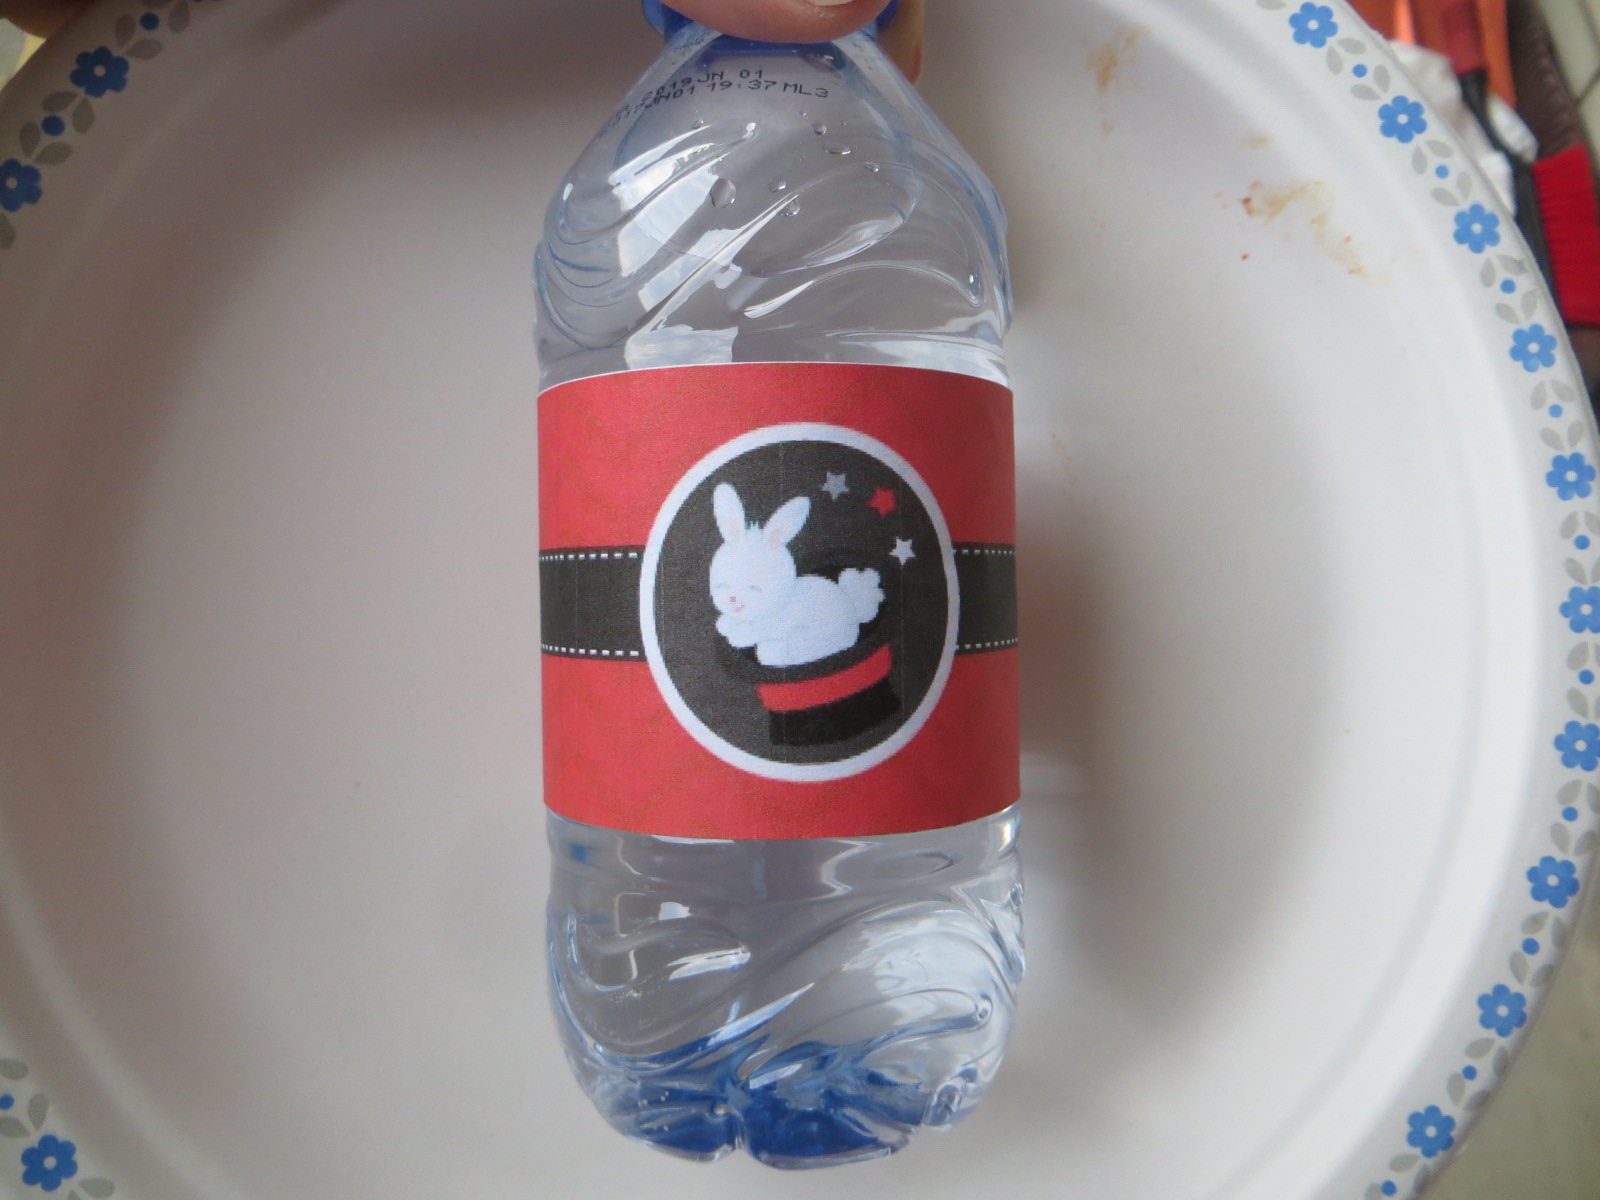 Water bottle with cute home made magic theme label.